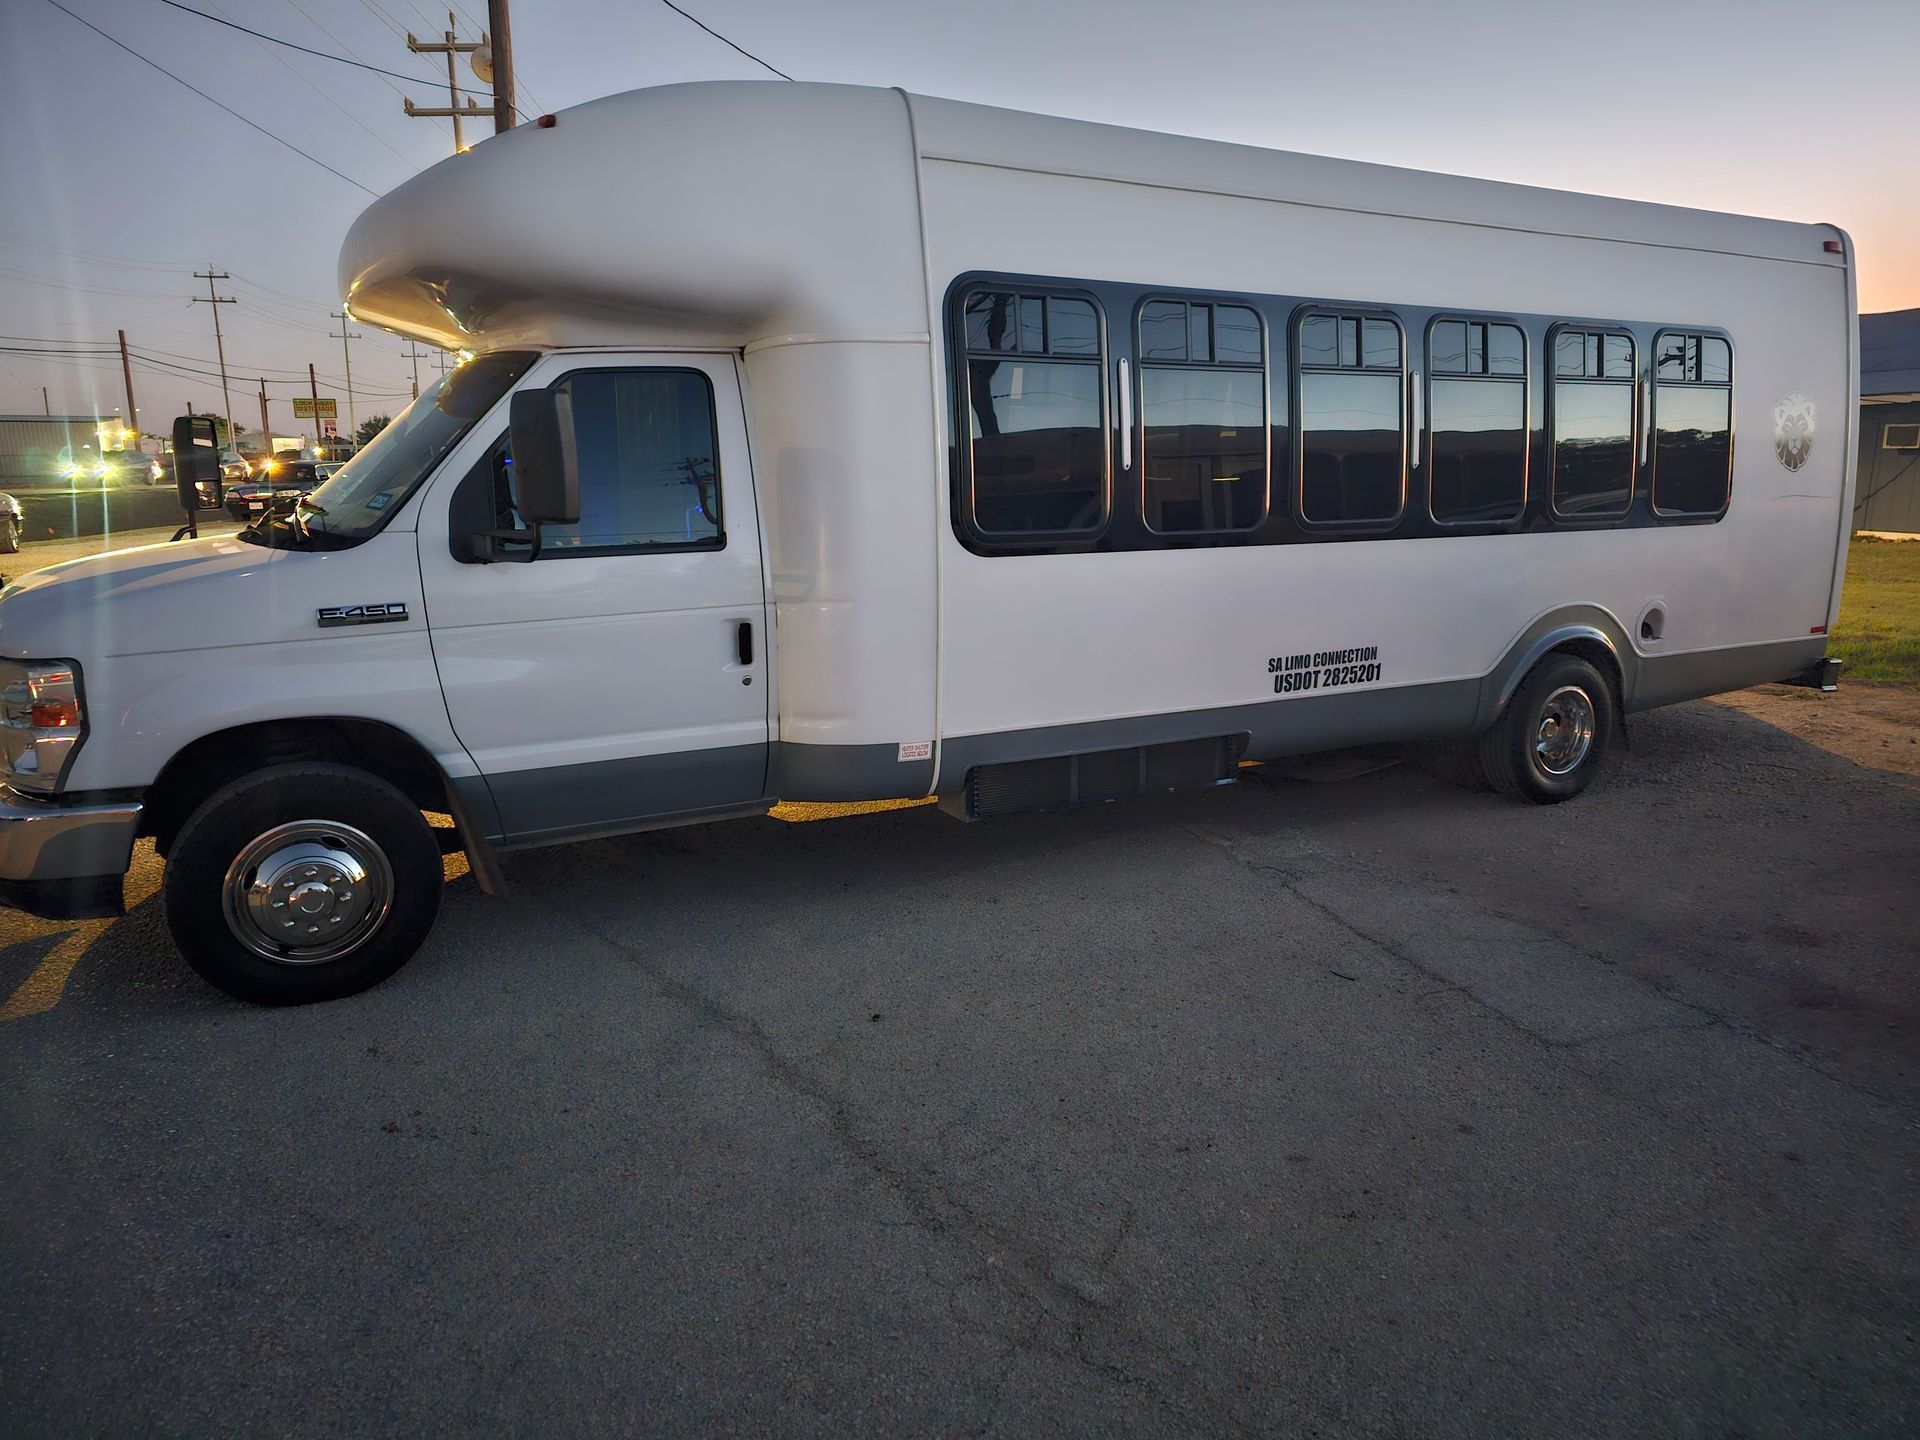 D Town SATX San Antonio party bus for up to 24 passengers exterior view parked in Stone Oak